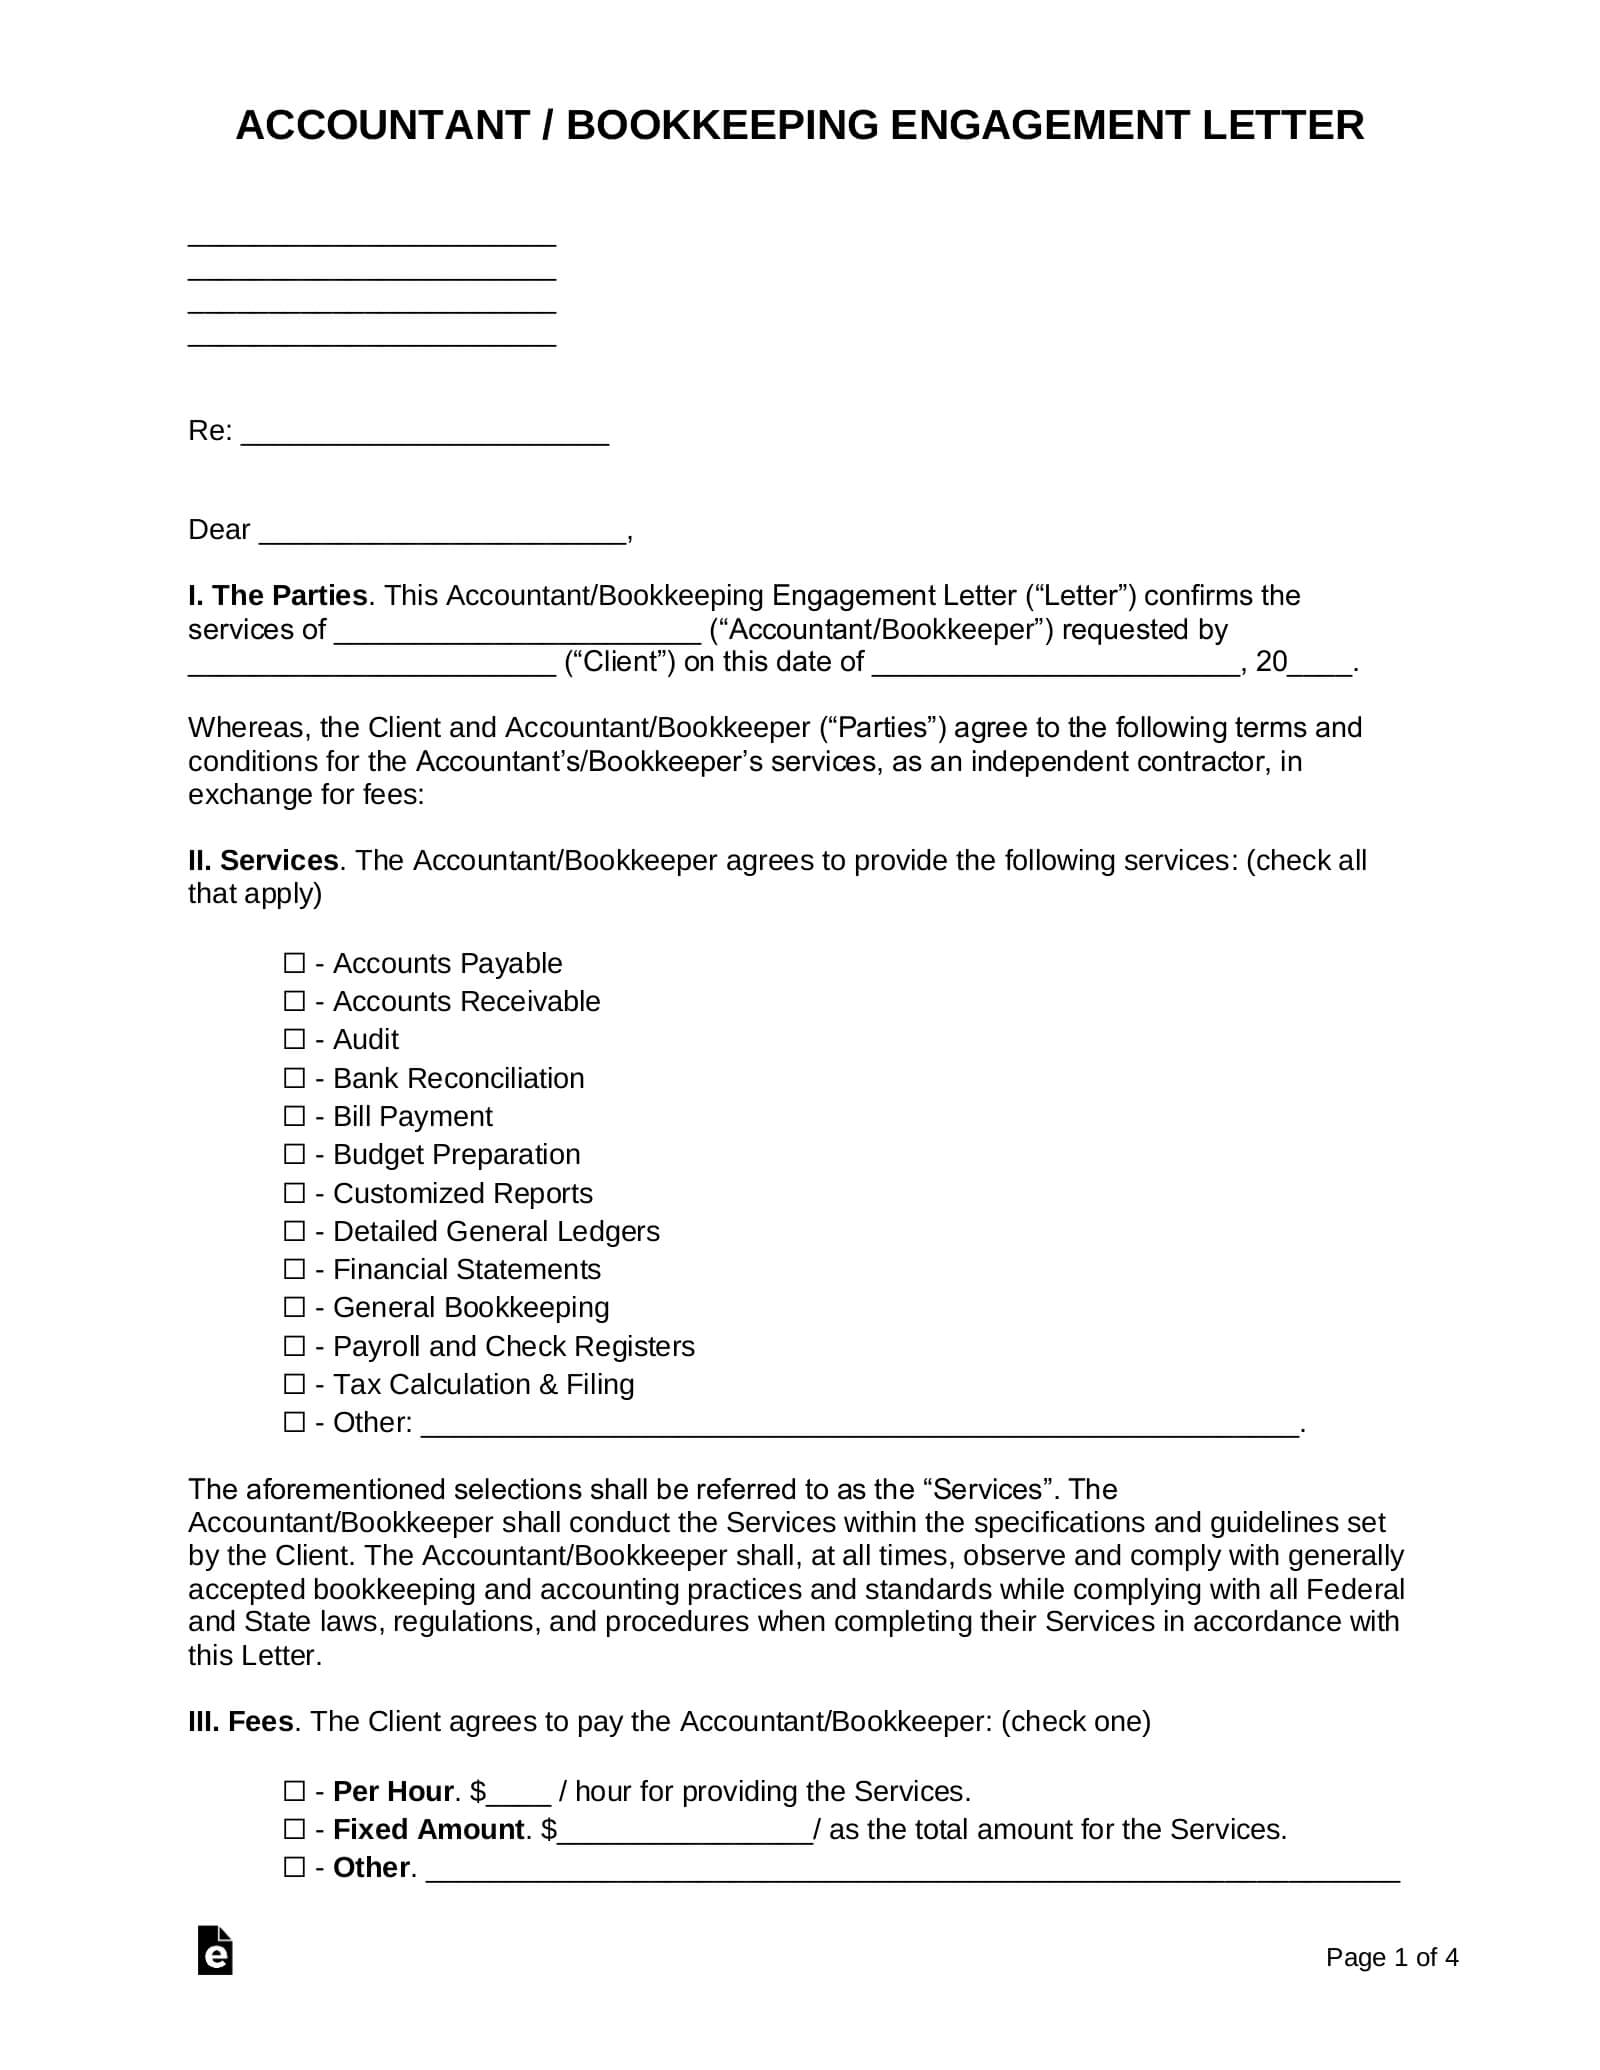 Free Accountant / Bookkeeping Engagement Letter – Pdf | Word For Bookkeeping Letter Of Engagement Template